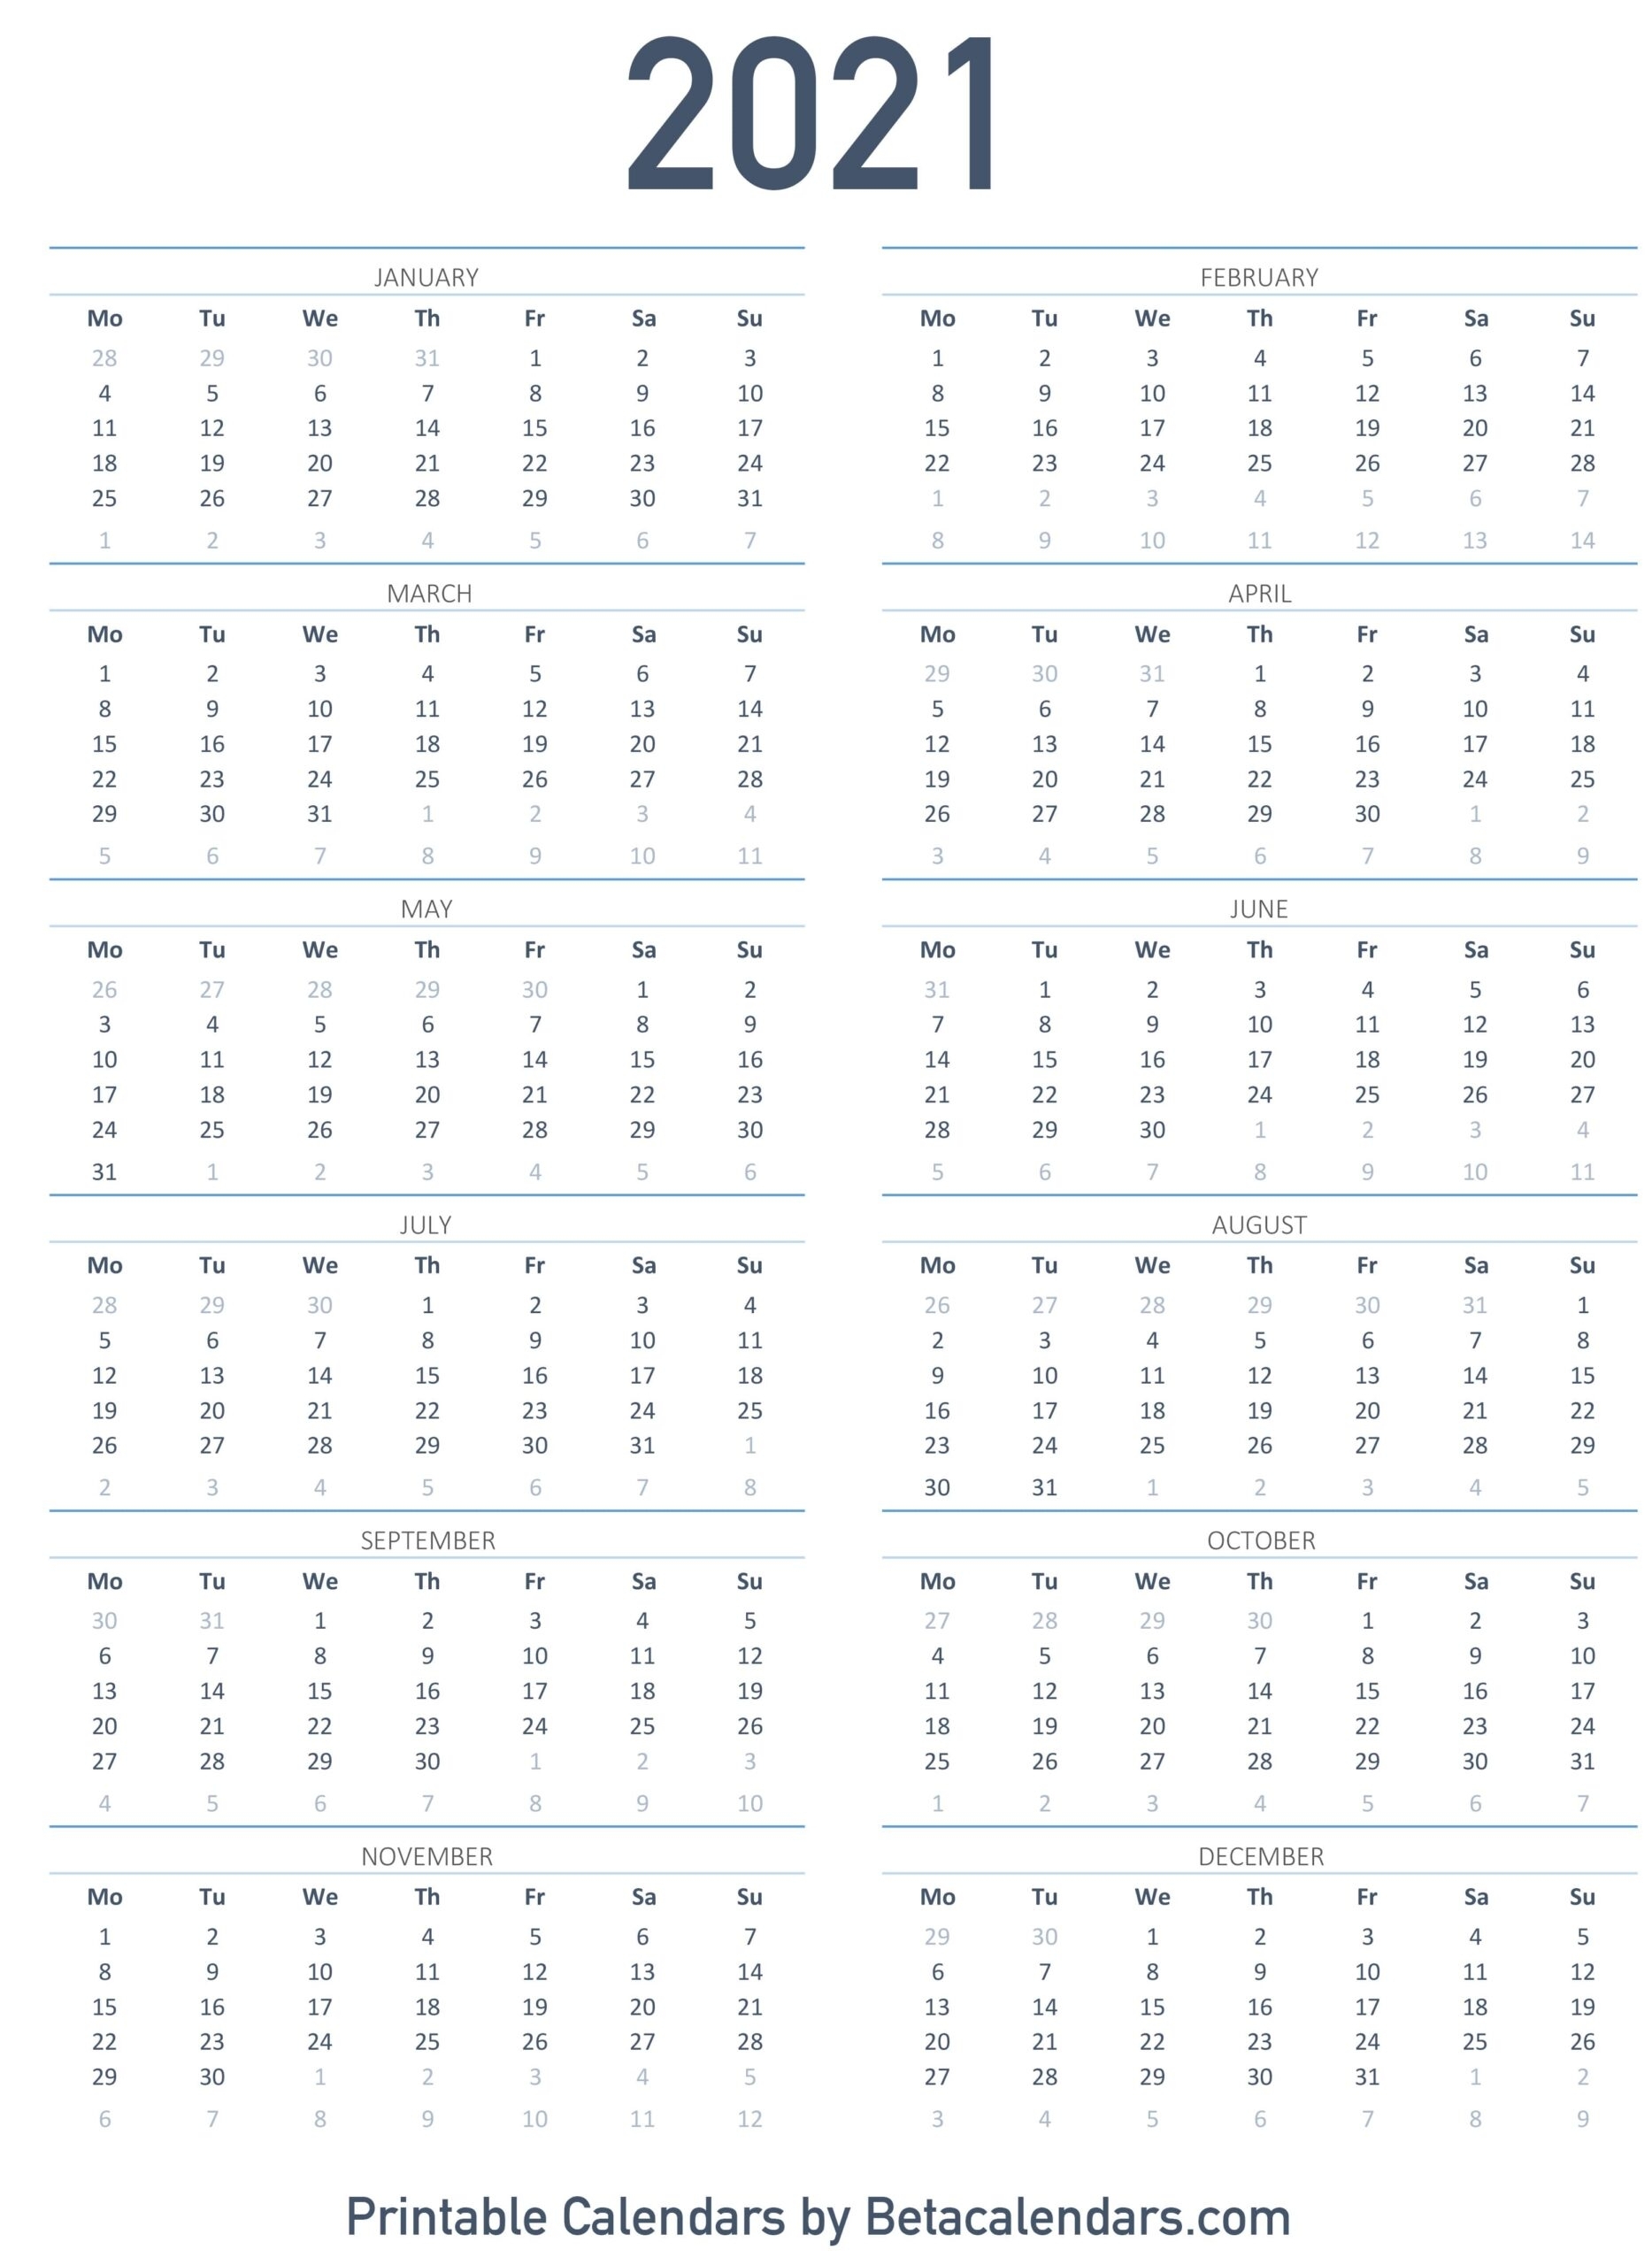 Collect Printable Free 2021 Calendar Without Downloading